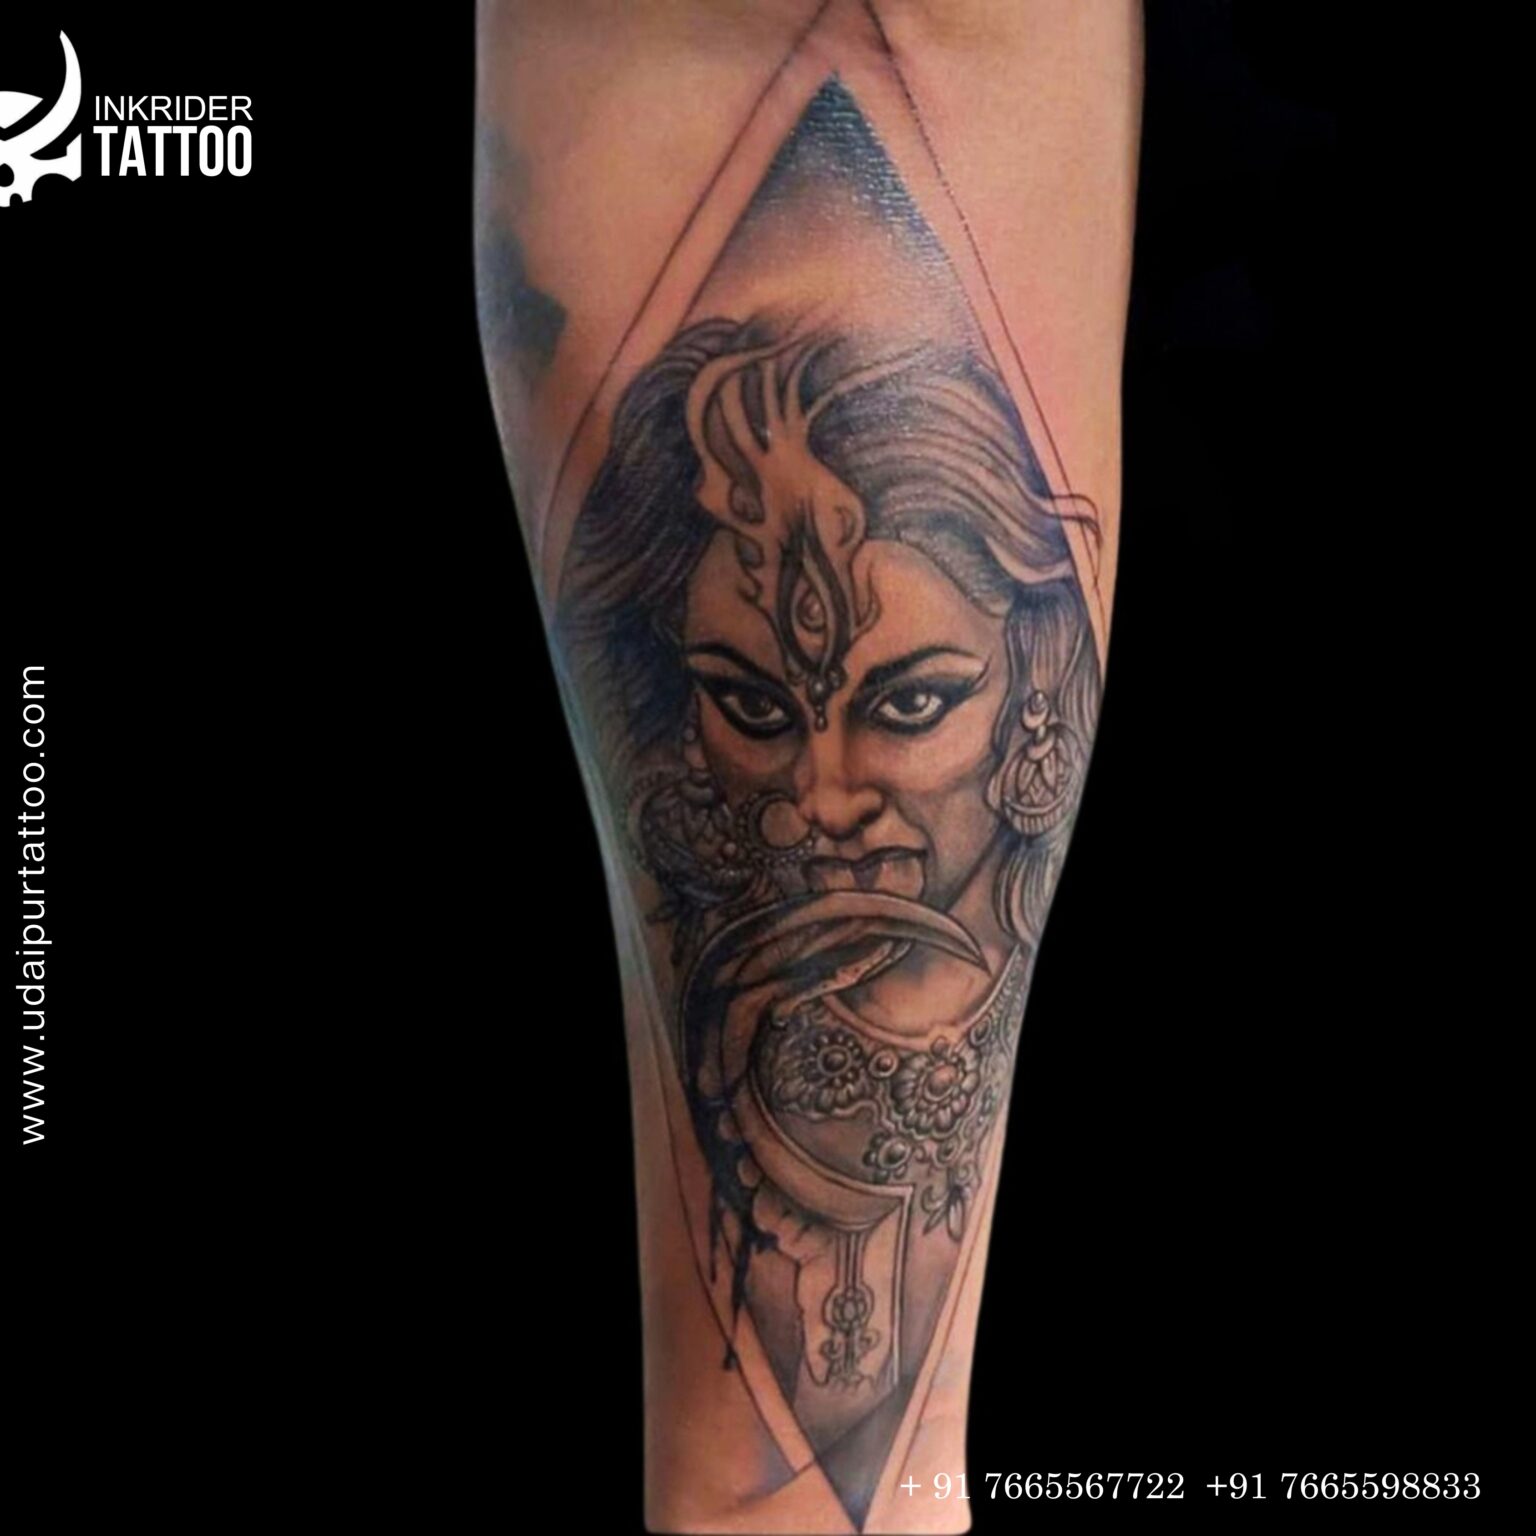 Inkrider Tattoos | Best & Most Rated Tattoo Shop In Udaipur - Udaipur Darpan